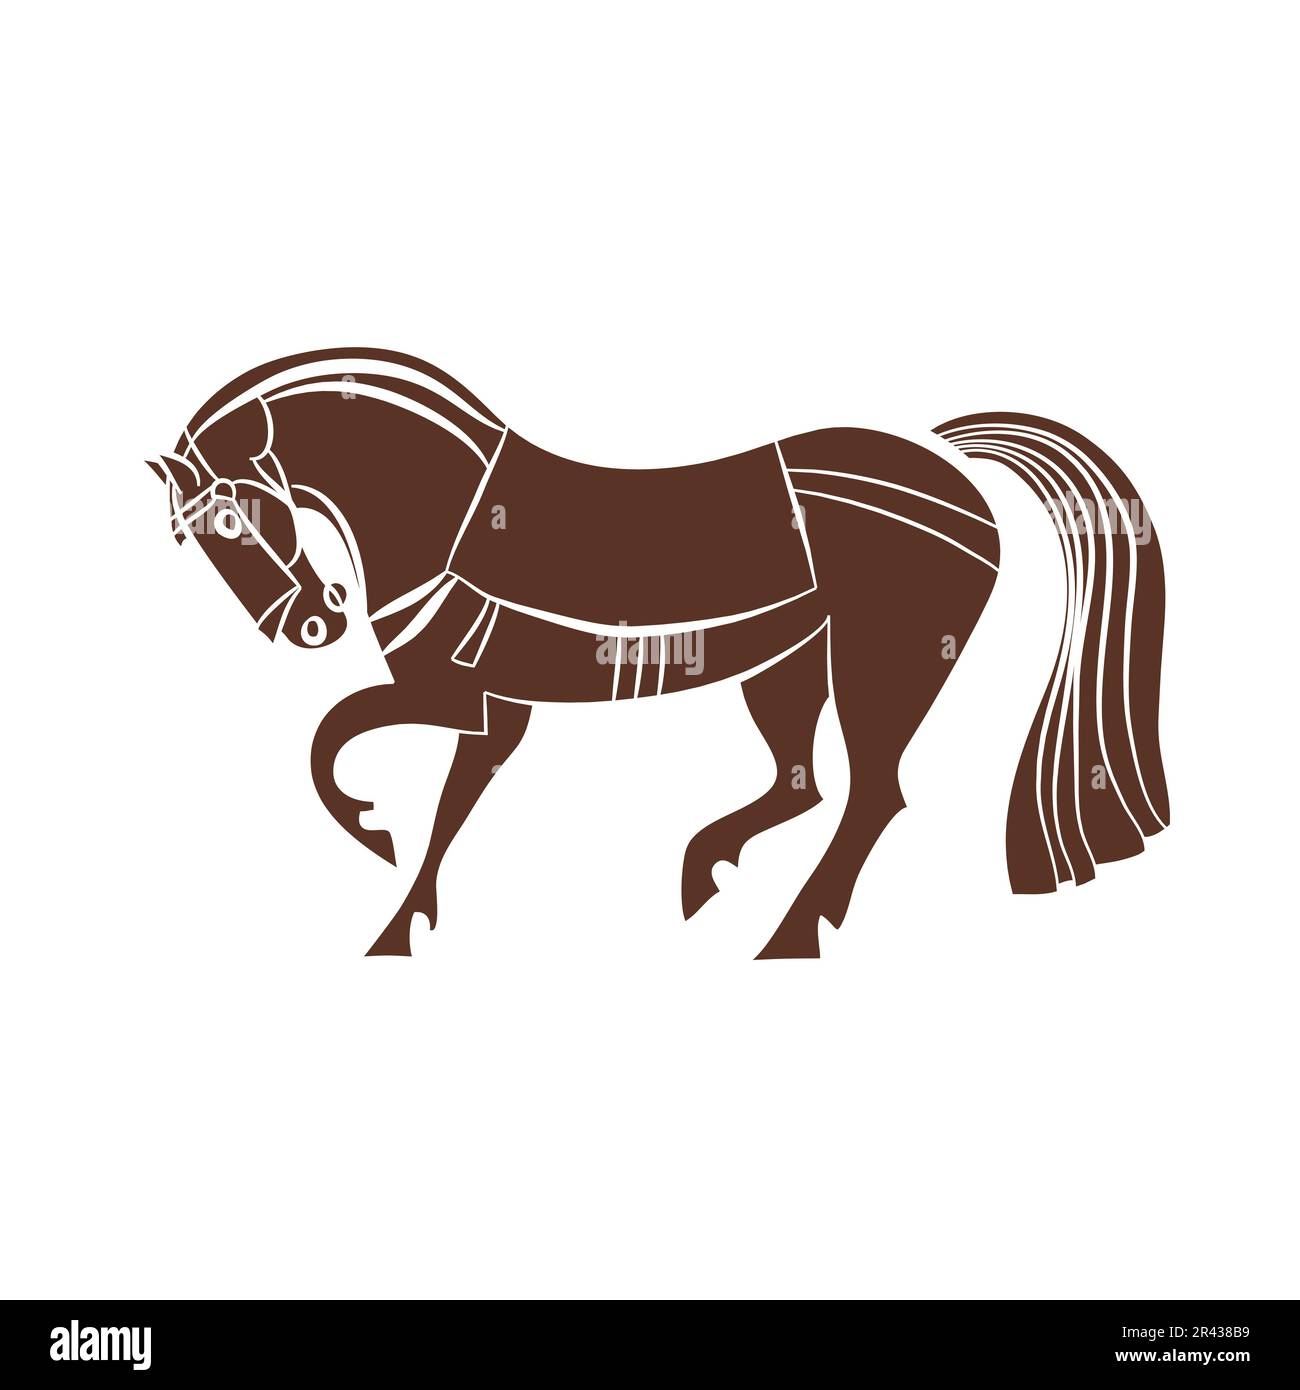 Saddled racehorse silhouette. Bay horse with brown hair on body. White outline of stallion in trendy linear style. Horseback riding. Animal hand drawi Stock Vector